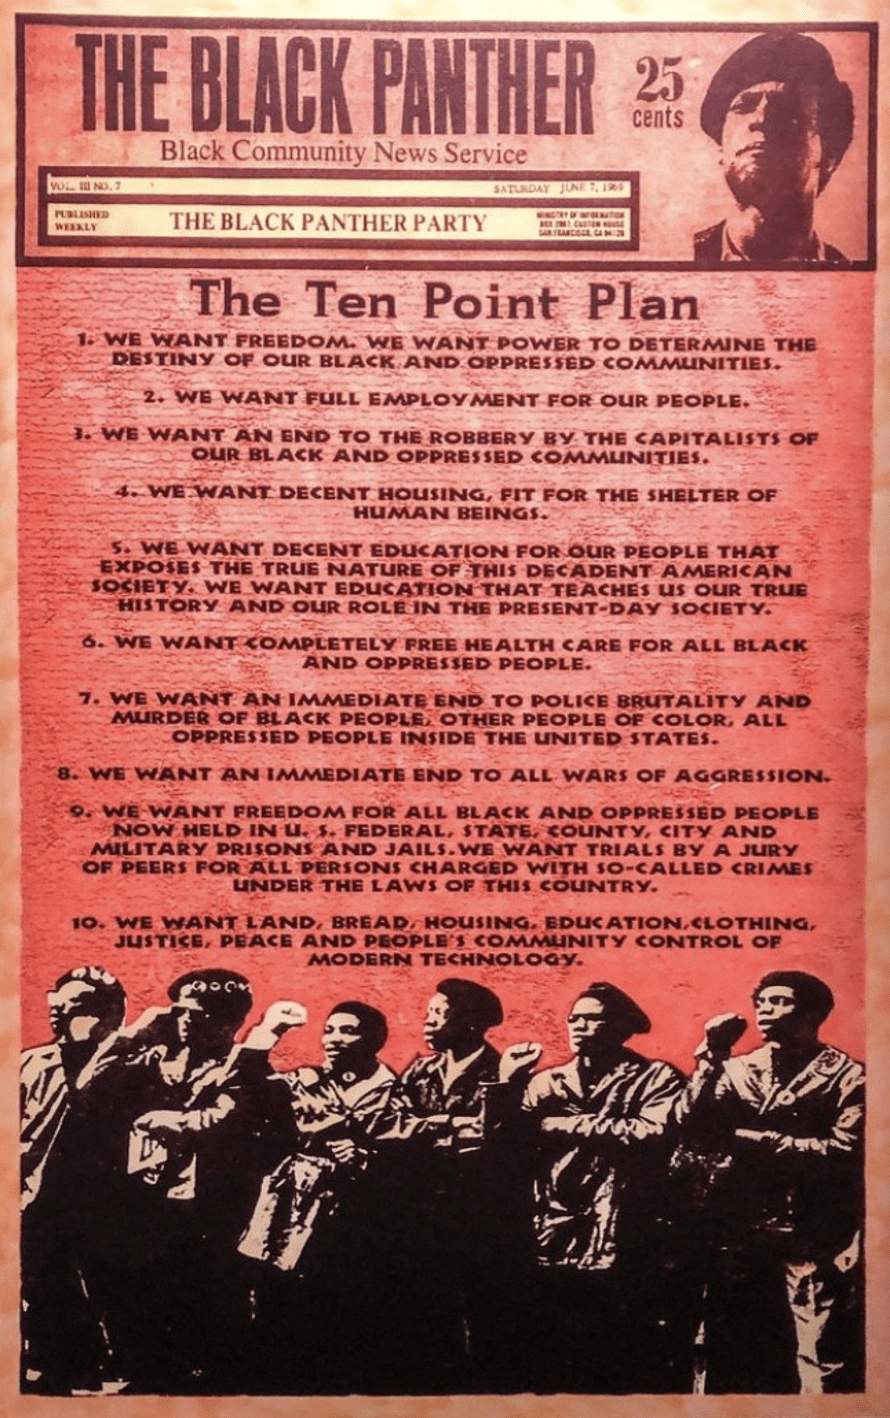 The Black Panther Party Ten Point Plan Pitzer College Art Galleries